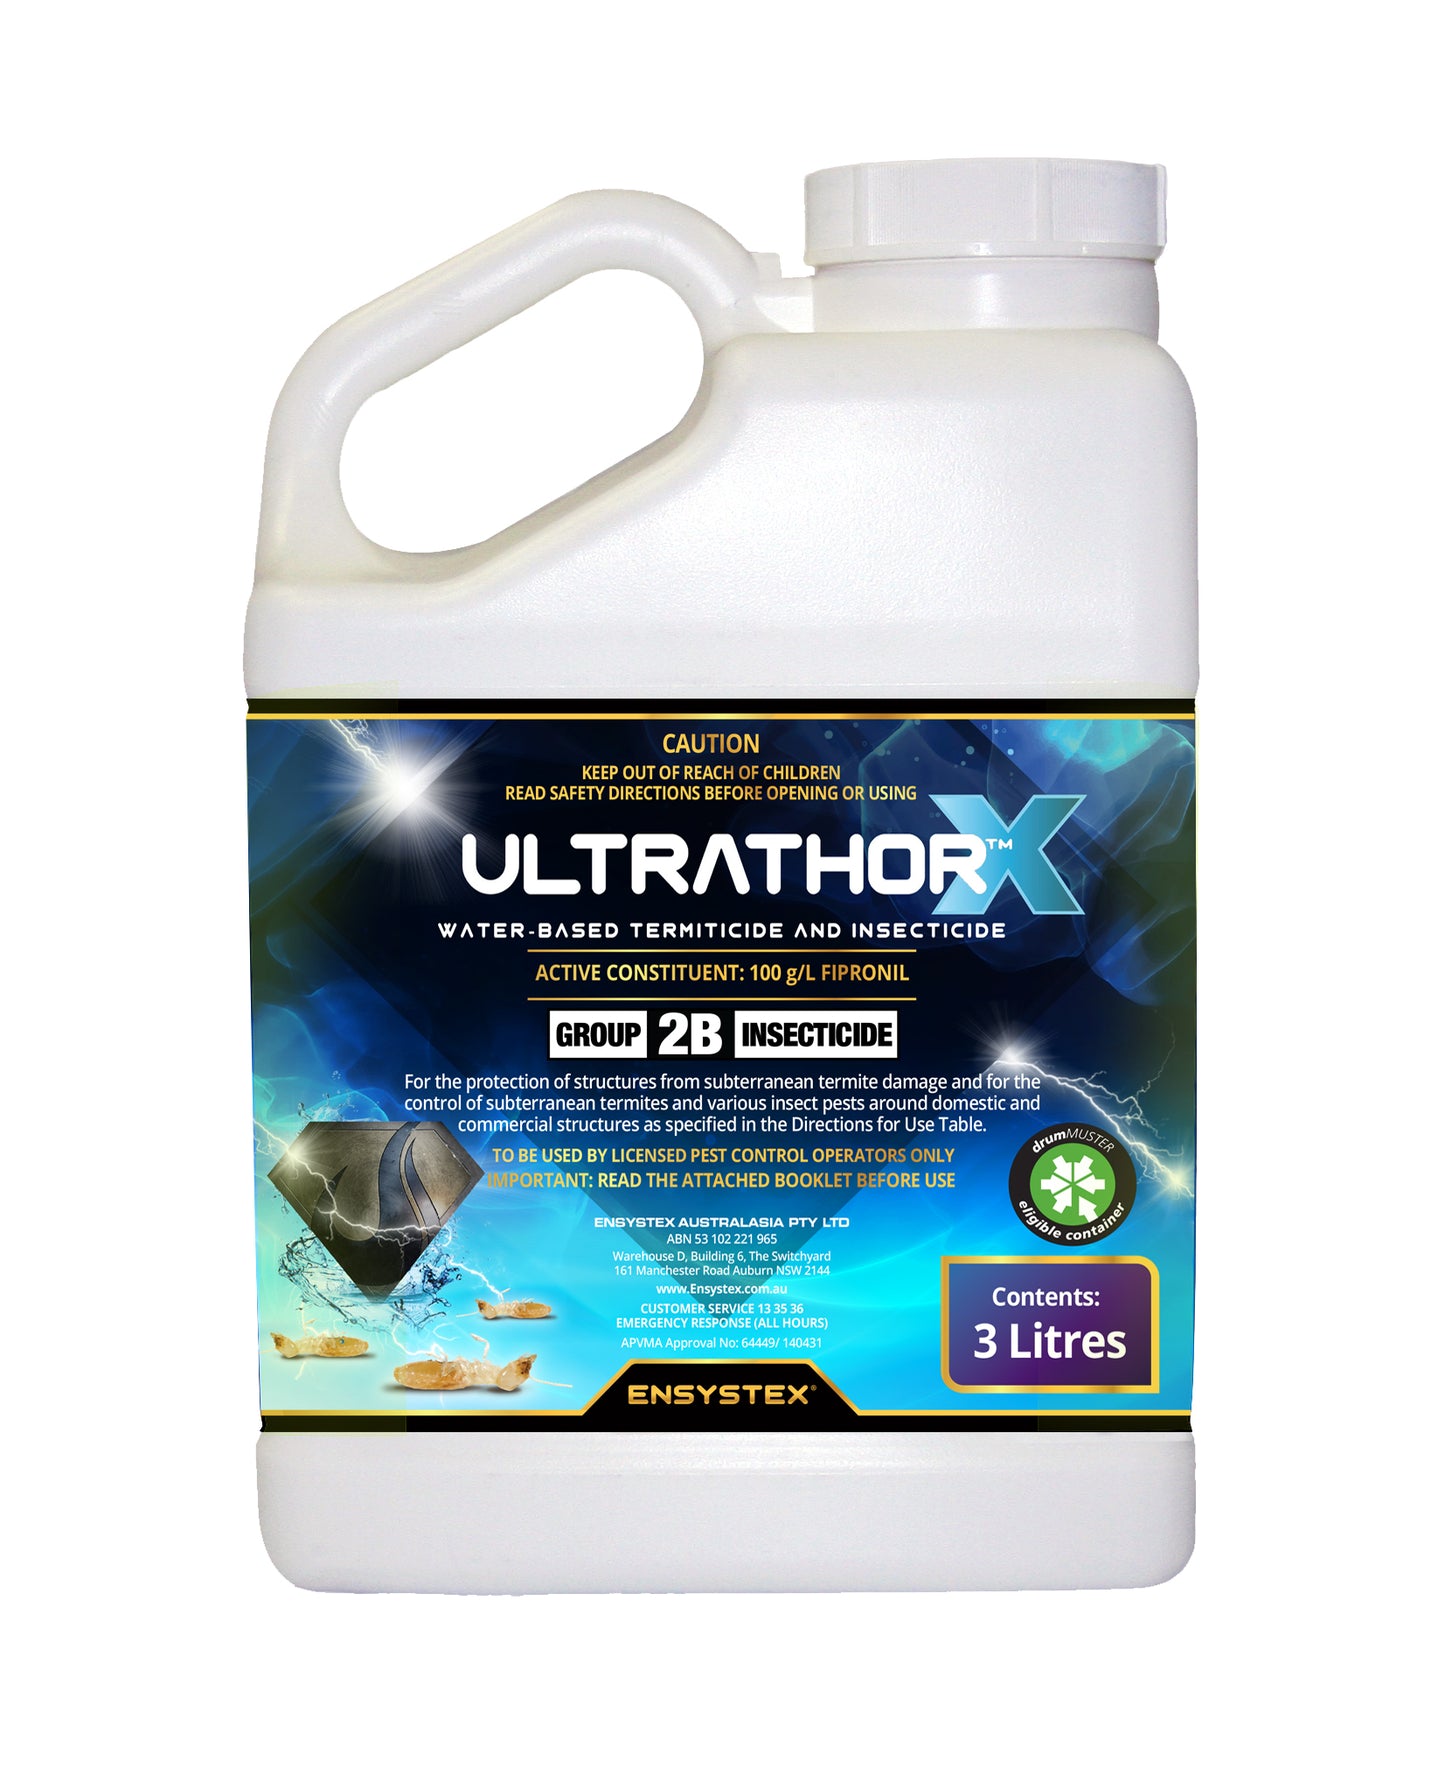 ULTRATHOR X™ Water-based Termiticide & Insecticide